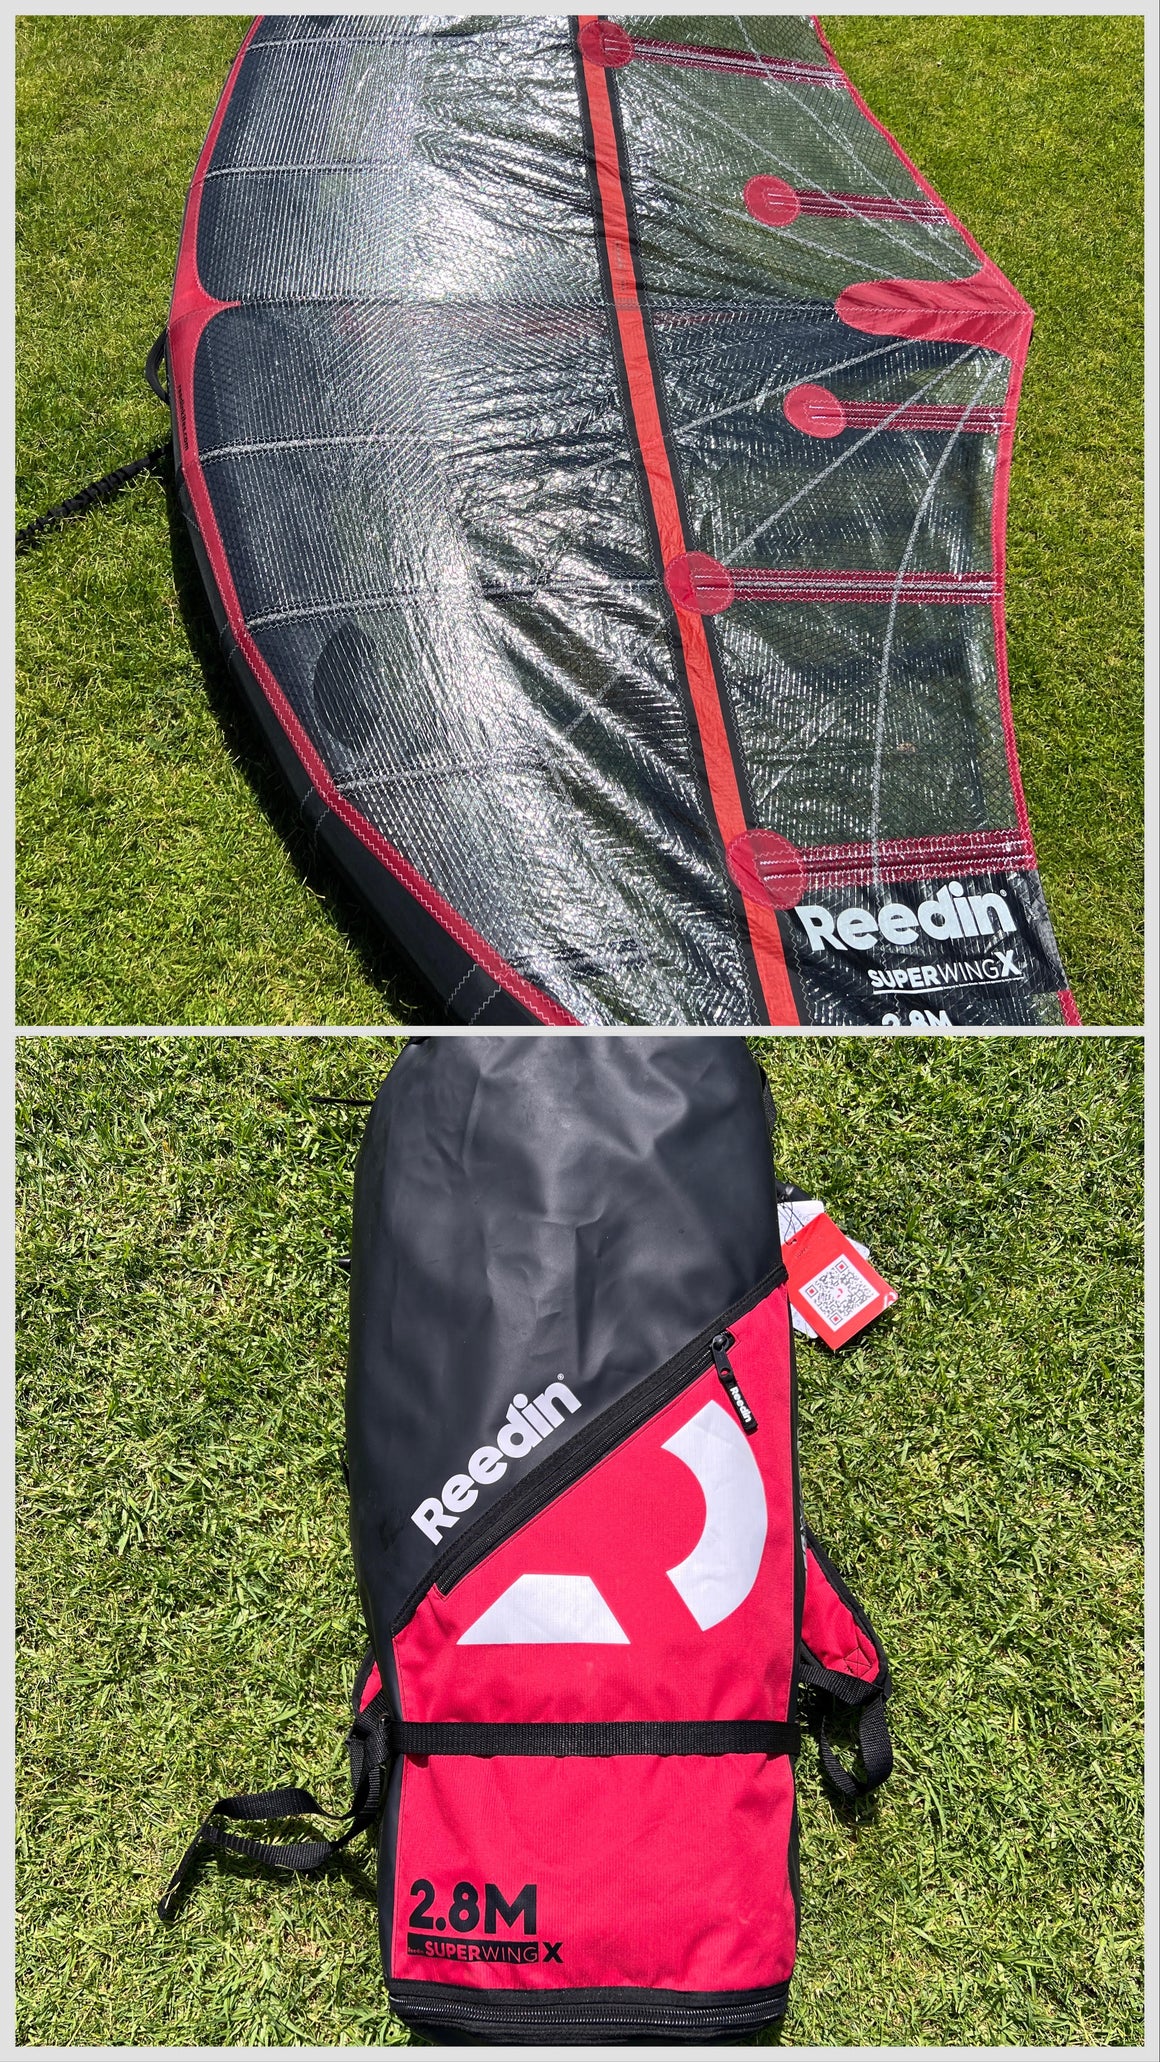 DEMO (as new) Reedin SuperWing X 2.8m (Save $1361)